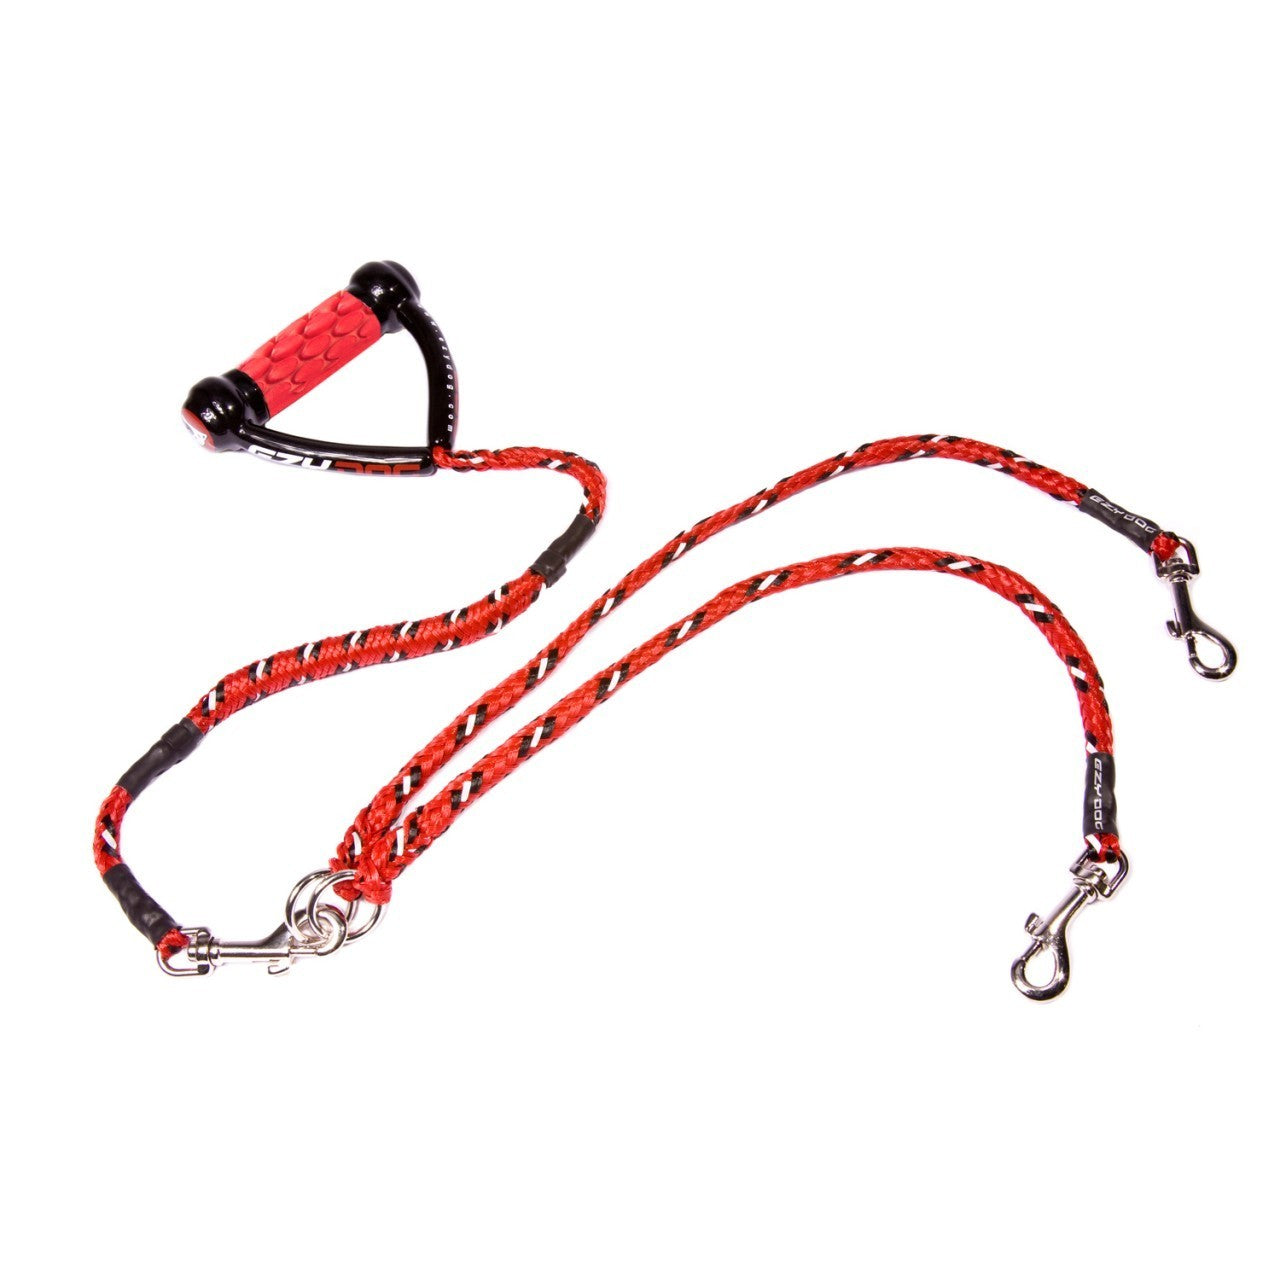 Two Dog Pull Absorbing Leash Solution